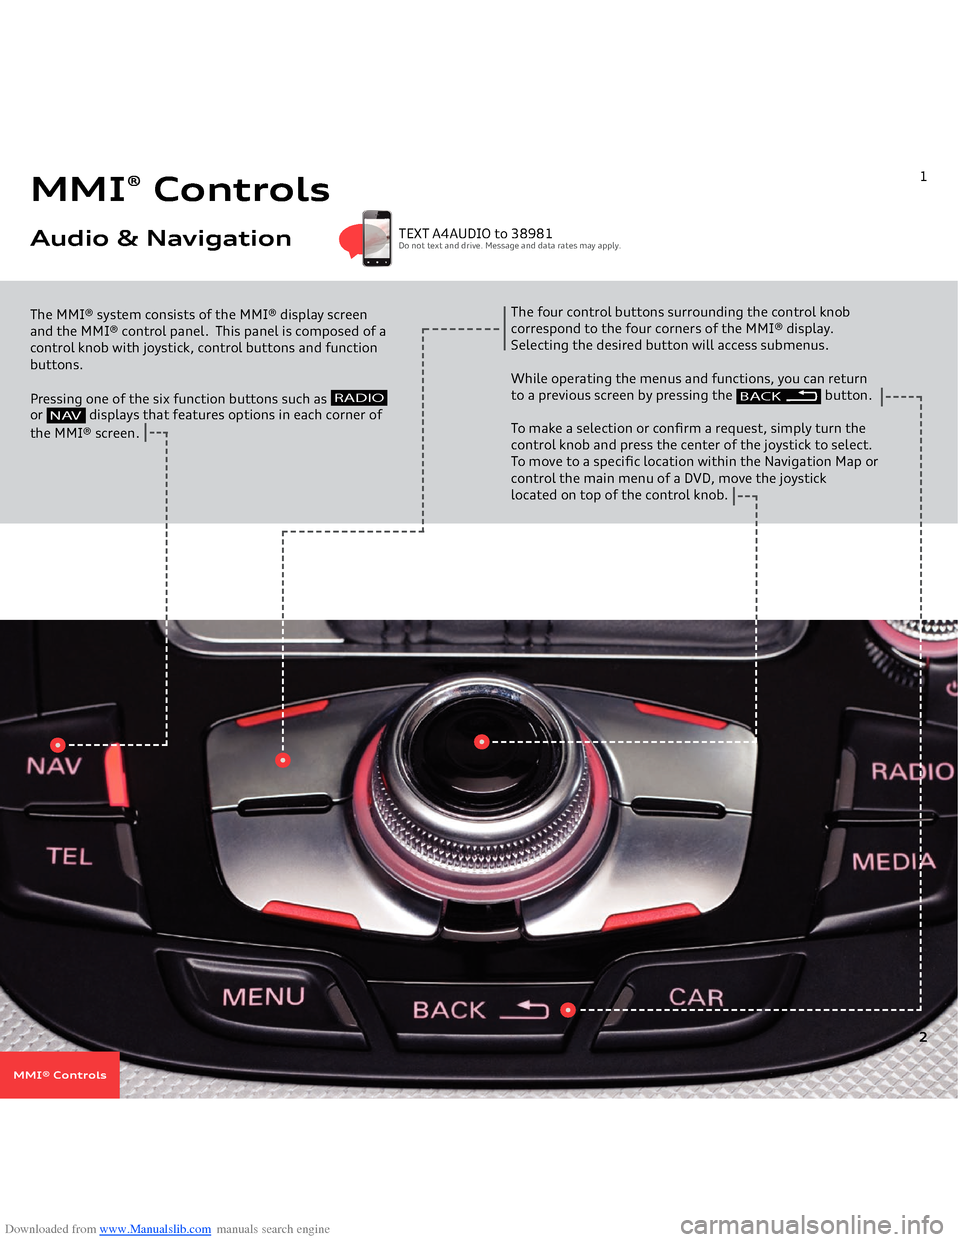 AUDI A4 2014 B8 / 4.G Getting To Know Downloaded from www.Manualslib.com manuals search engine MMI
® Controls
Audio & Navigation
 
The MMI® system consists of the MMI® display screen and the MMI® control panel.  This panel is composed